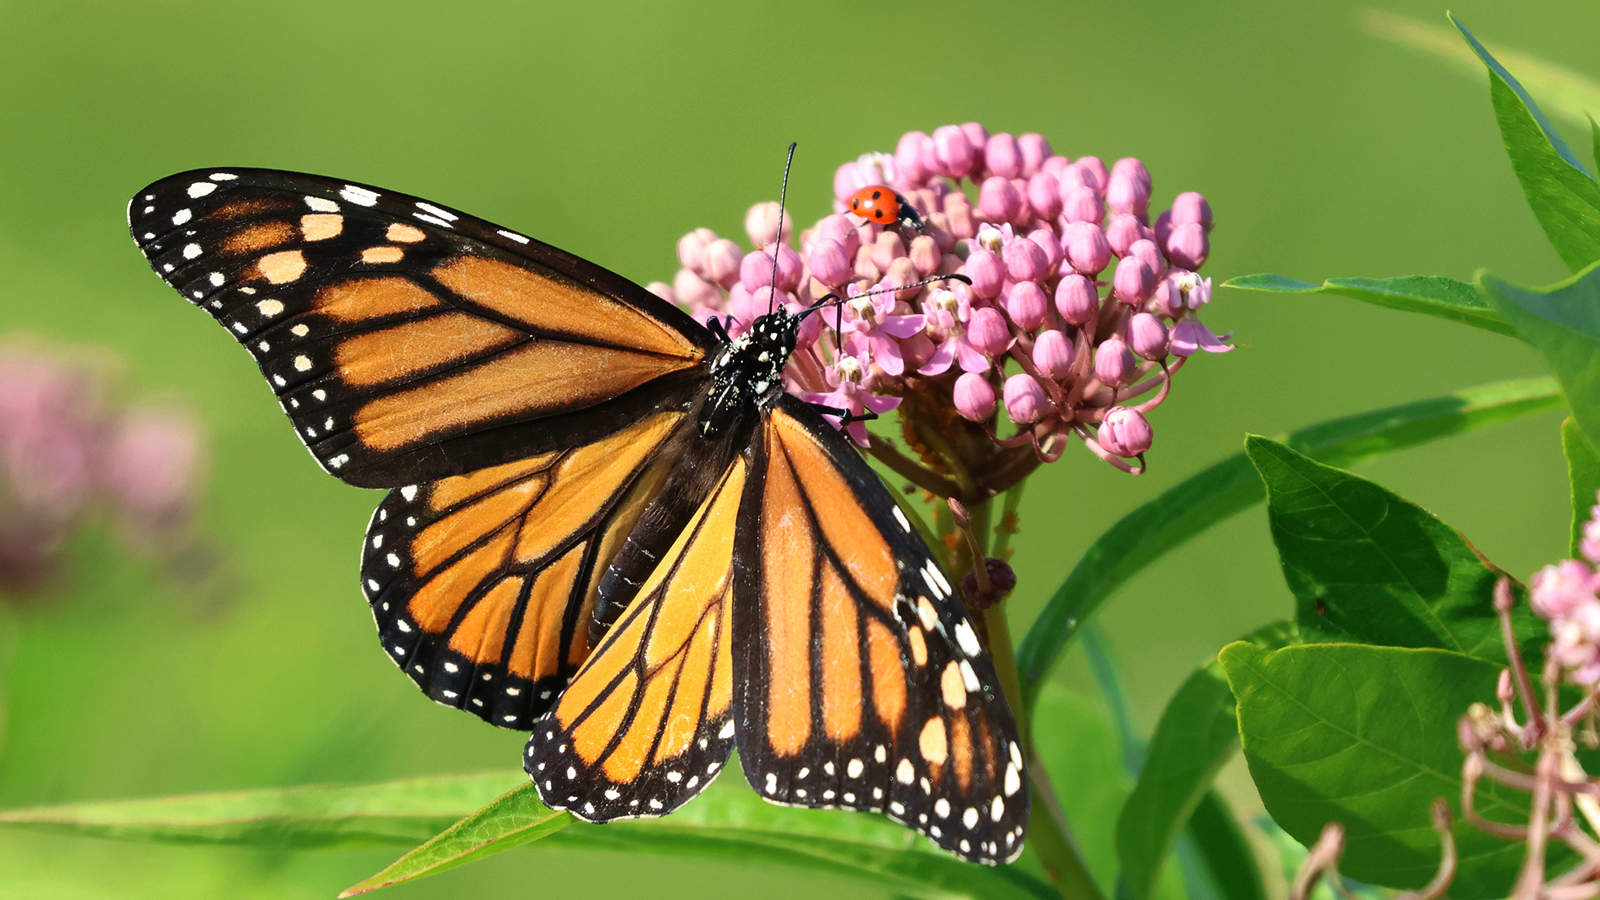 Monarch butterfly migration is starting, and they need our help.